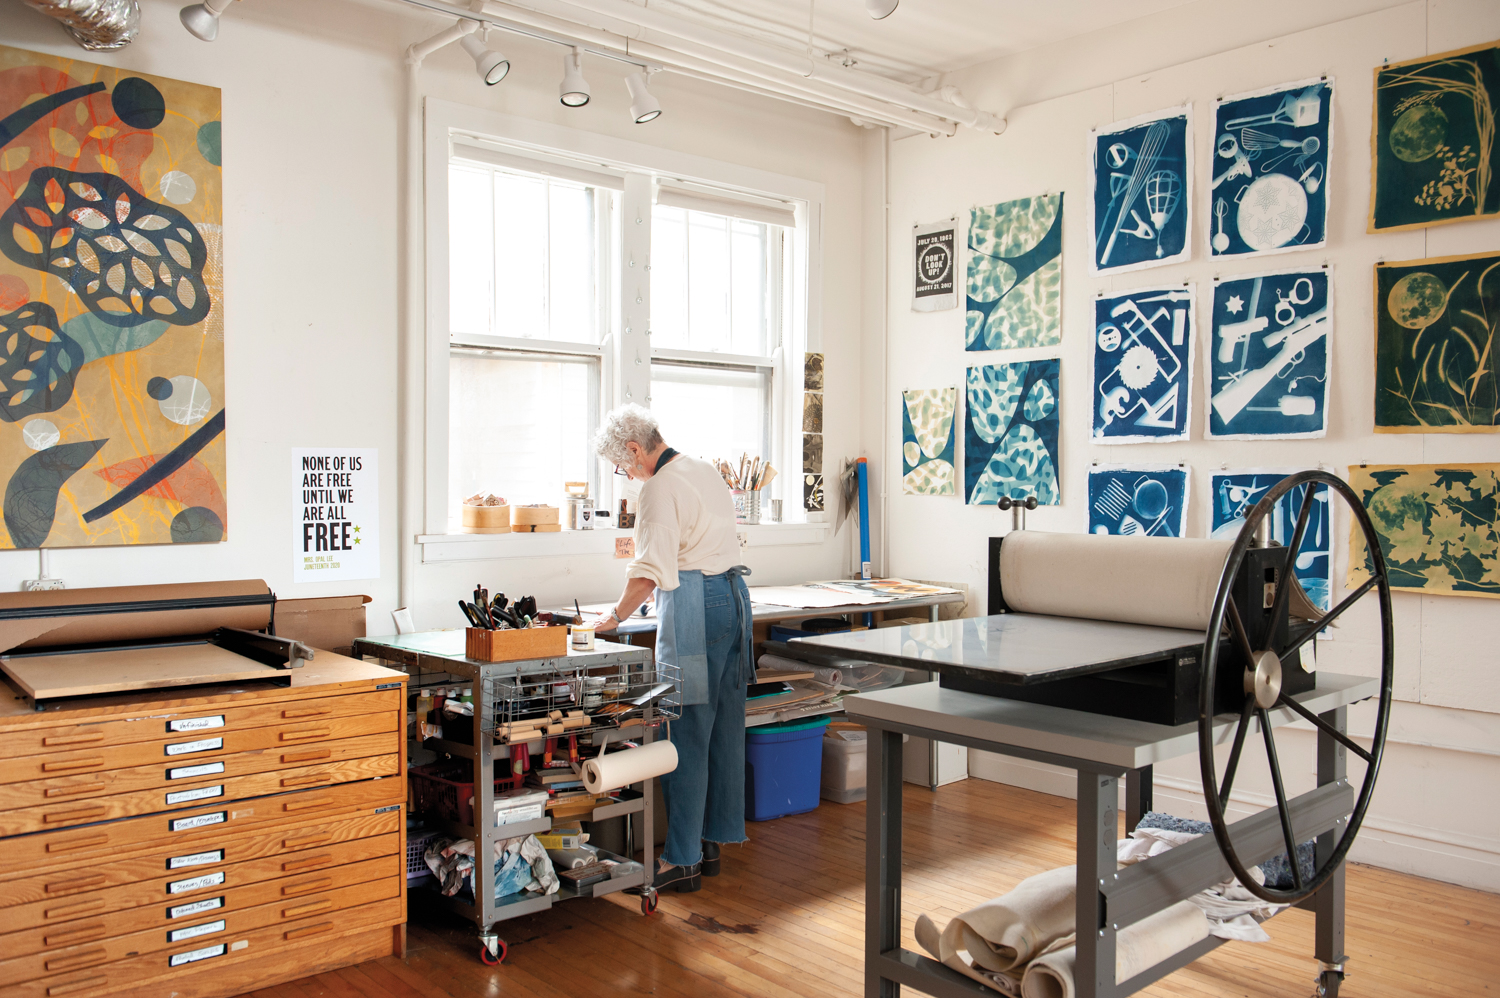 A woman at work in a print studio.